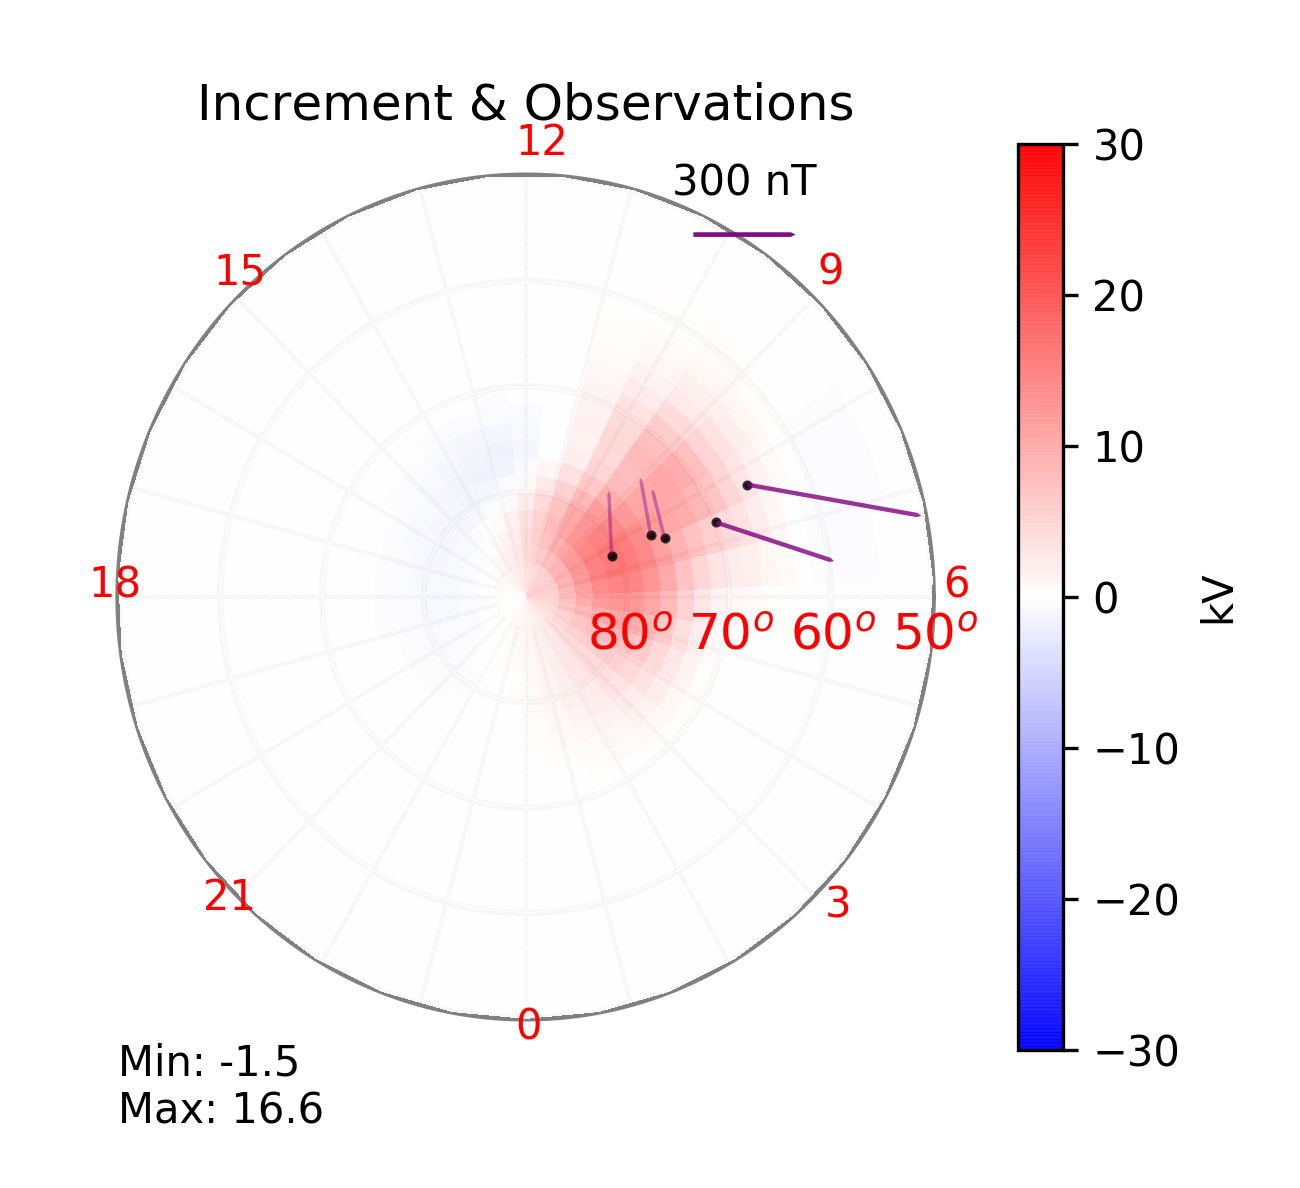 Here, SuperMAG data from five Greenland magnetometer stations is shown as well as the generated electric potential plot from this data. This generated electric potential plot is the contribution of the SuperMAG data to the creation of the electrostatic potential AMGeO map.